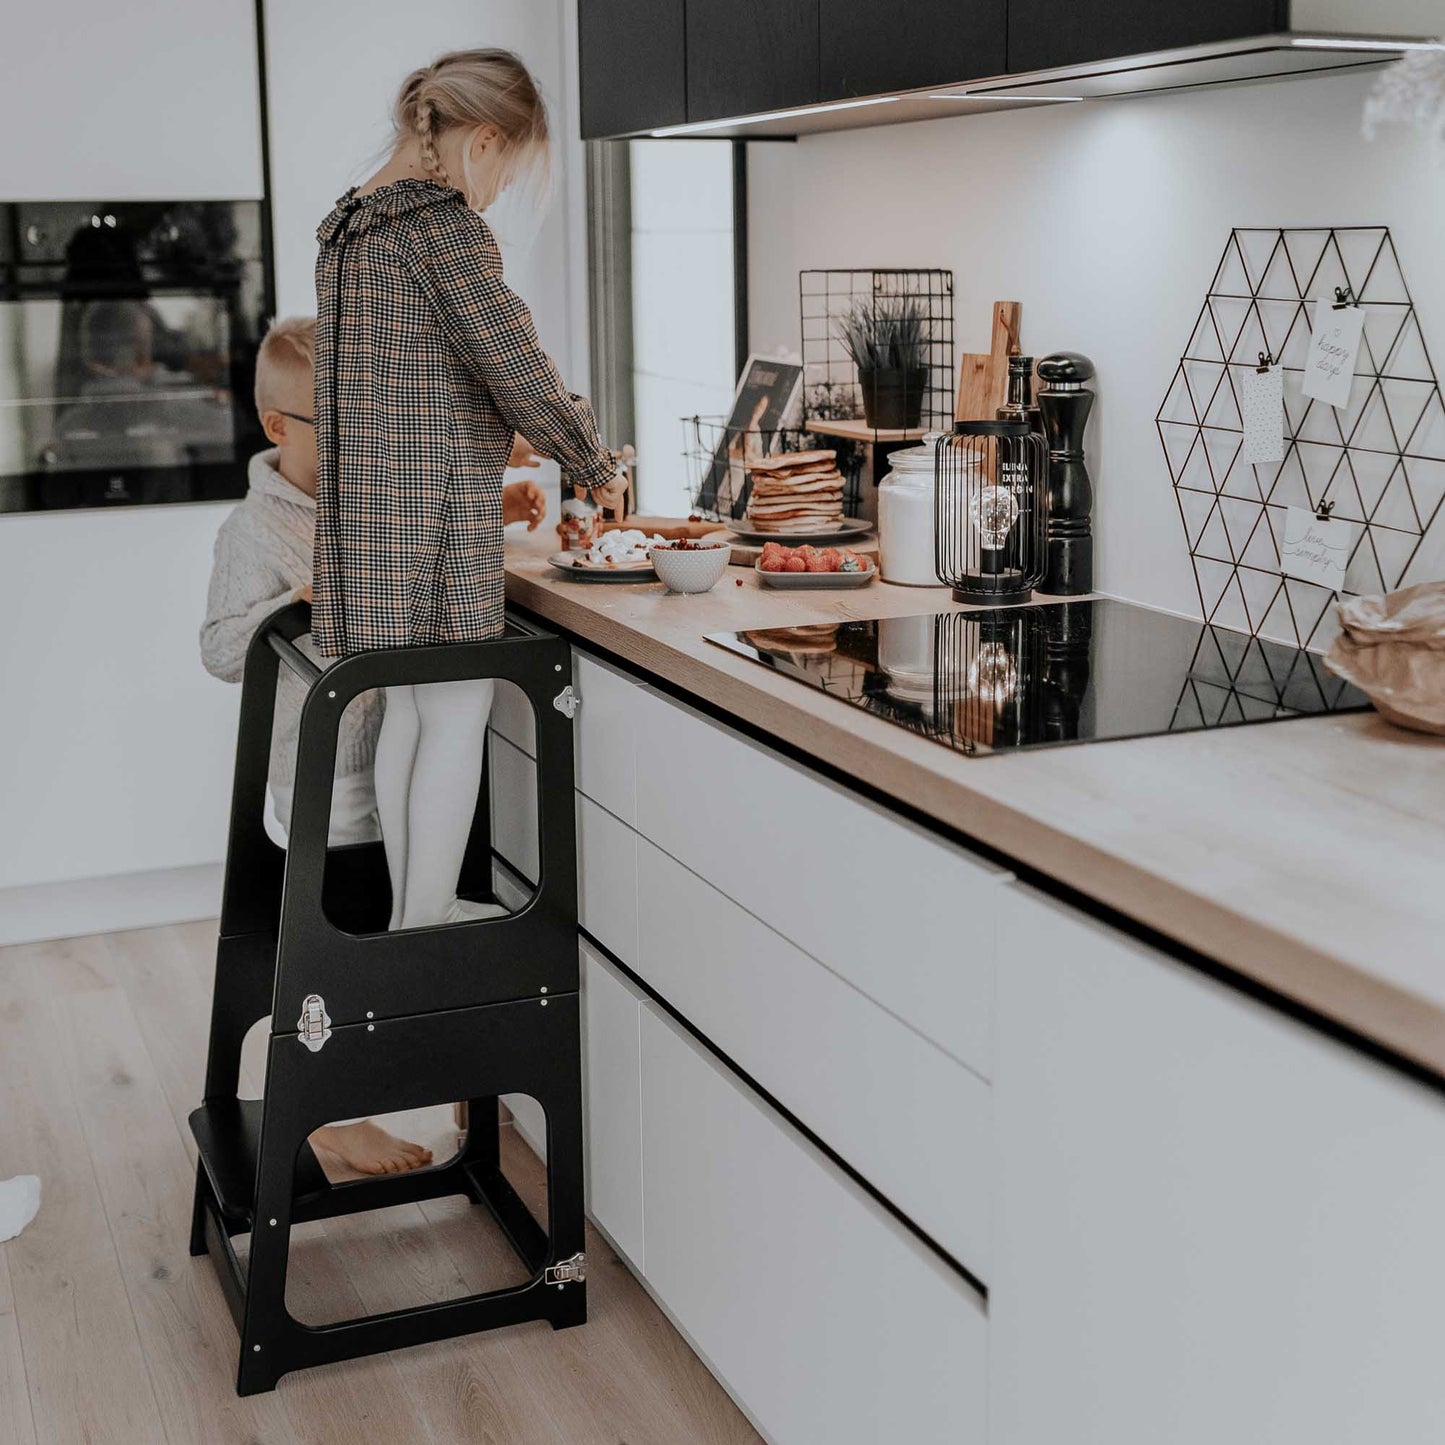 A child is standing on a Sweet Home From Wood 2-in-1 transformable kitchen tower - table and chair in a kitchen.